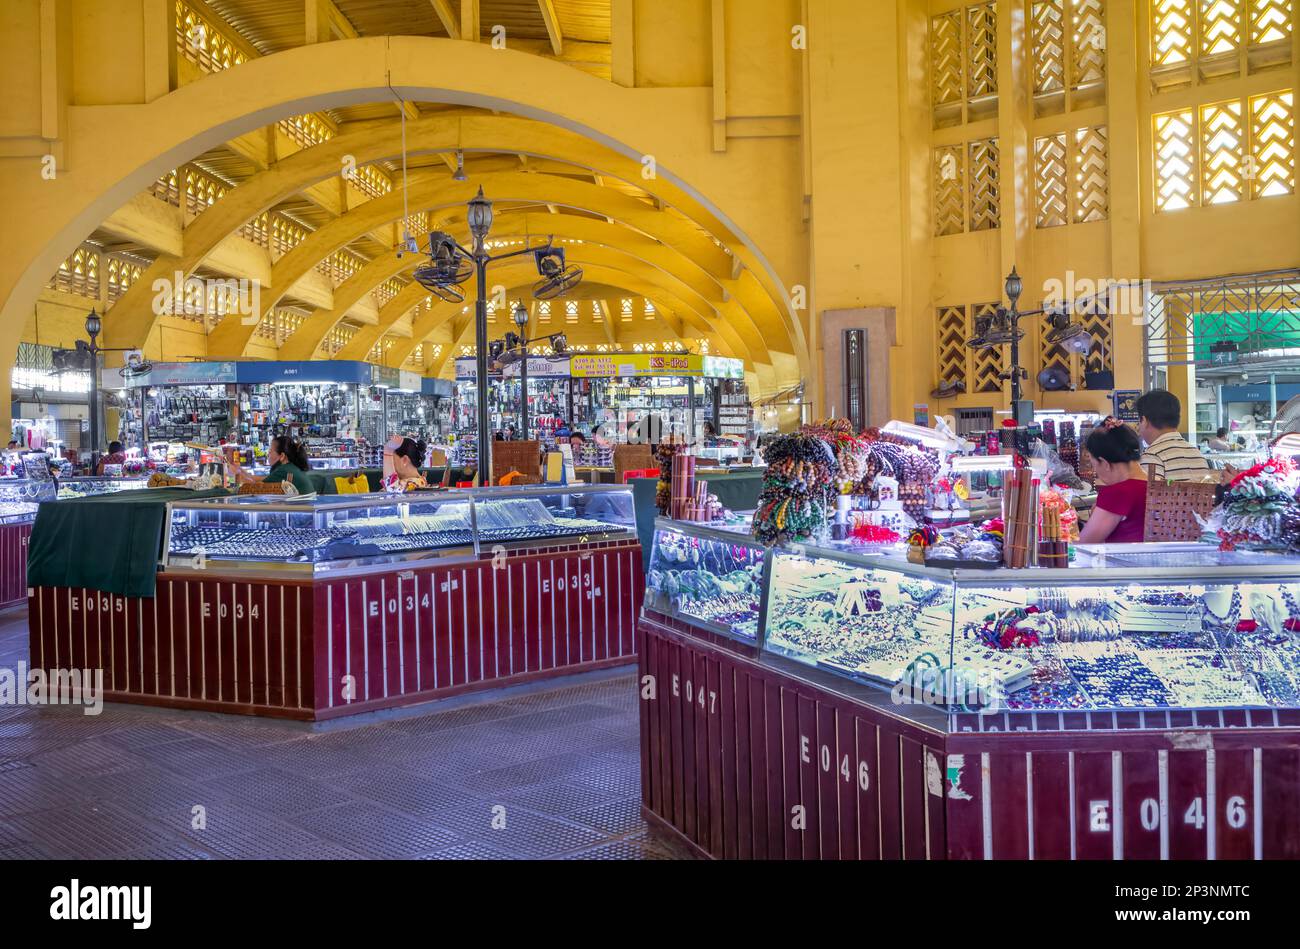 A view across the ground floor jewellry stalls in the art deco Central Market in Phnom Penh, Cambodia. Stock Photo